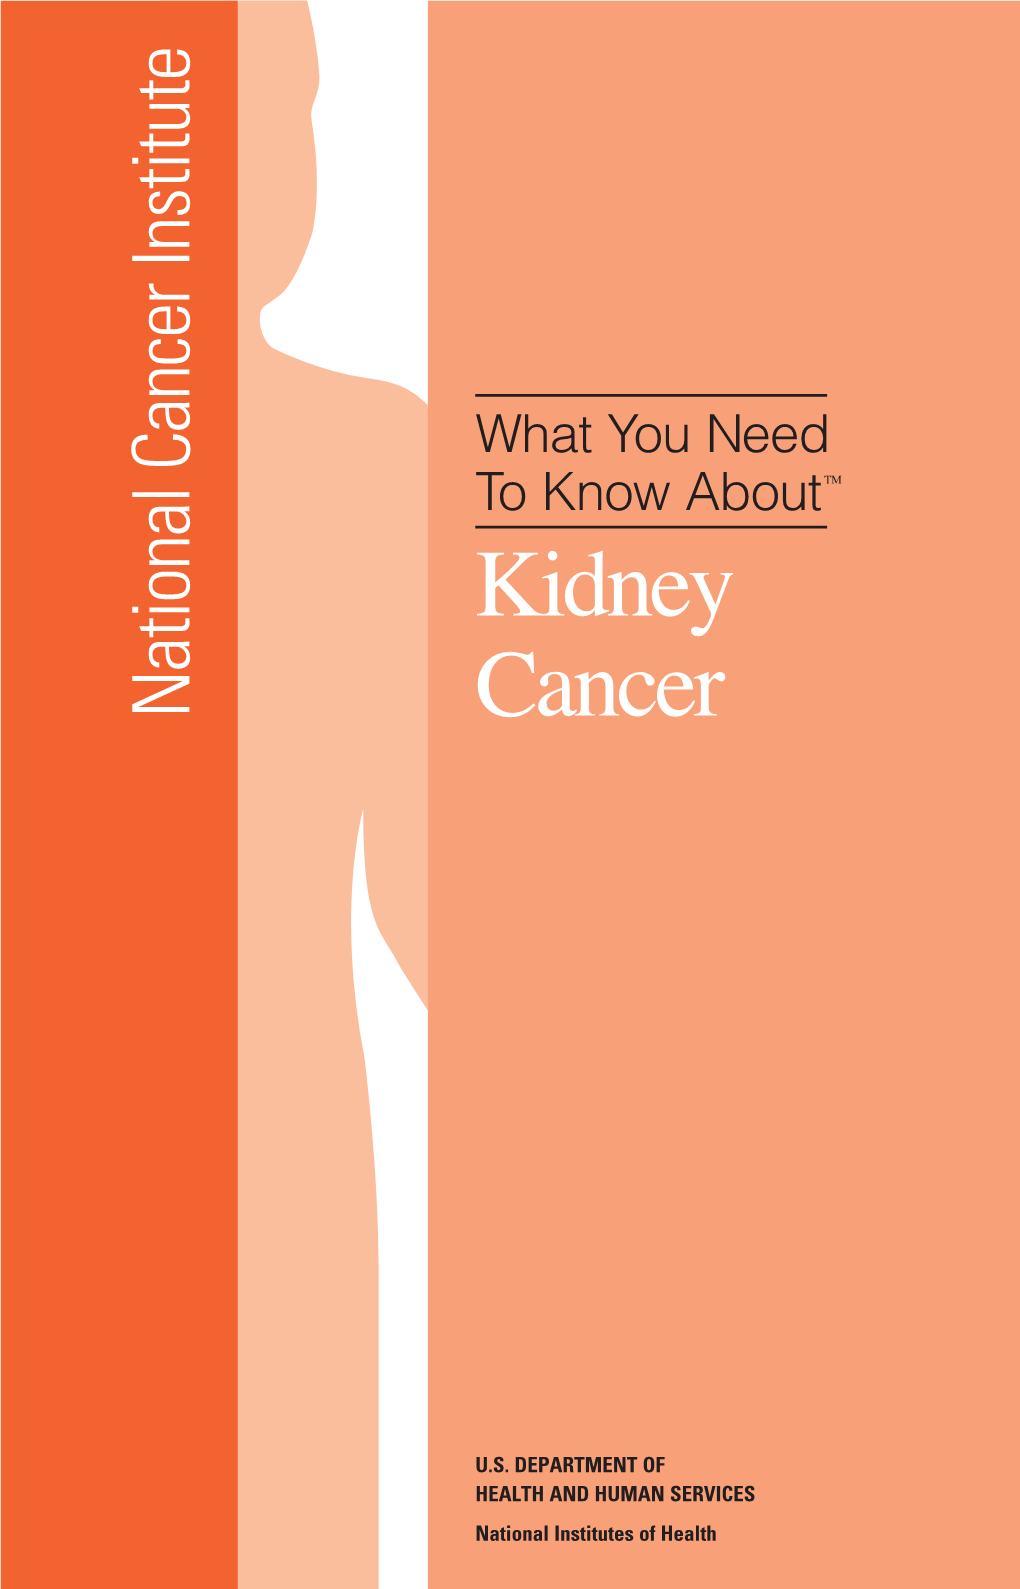 What You Need to Know About Kidney Cancer